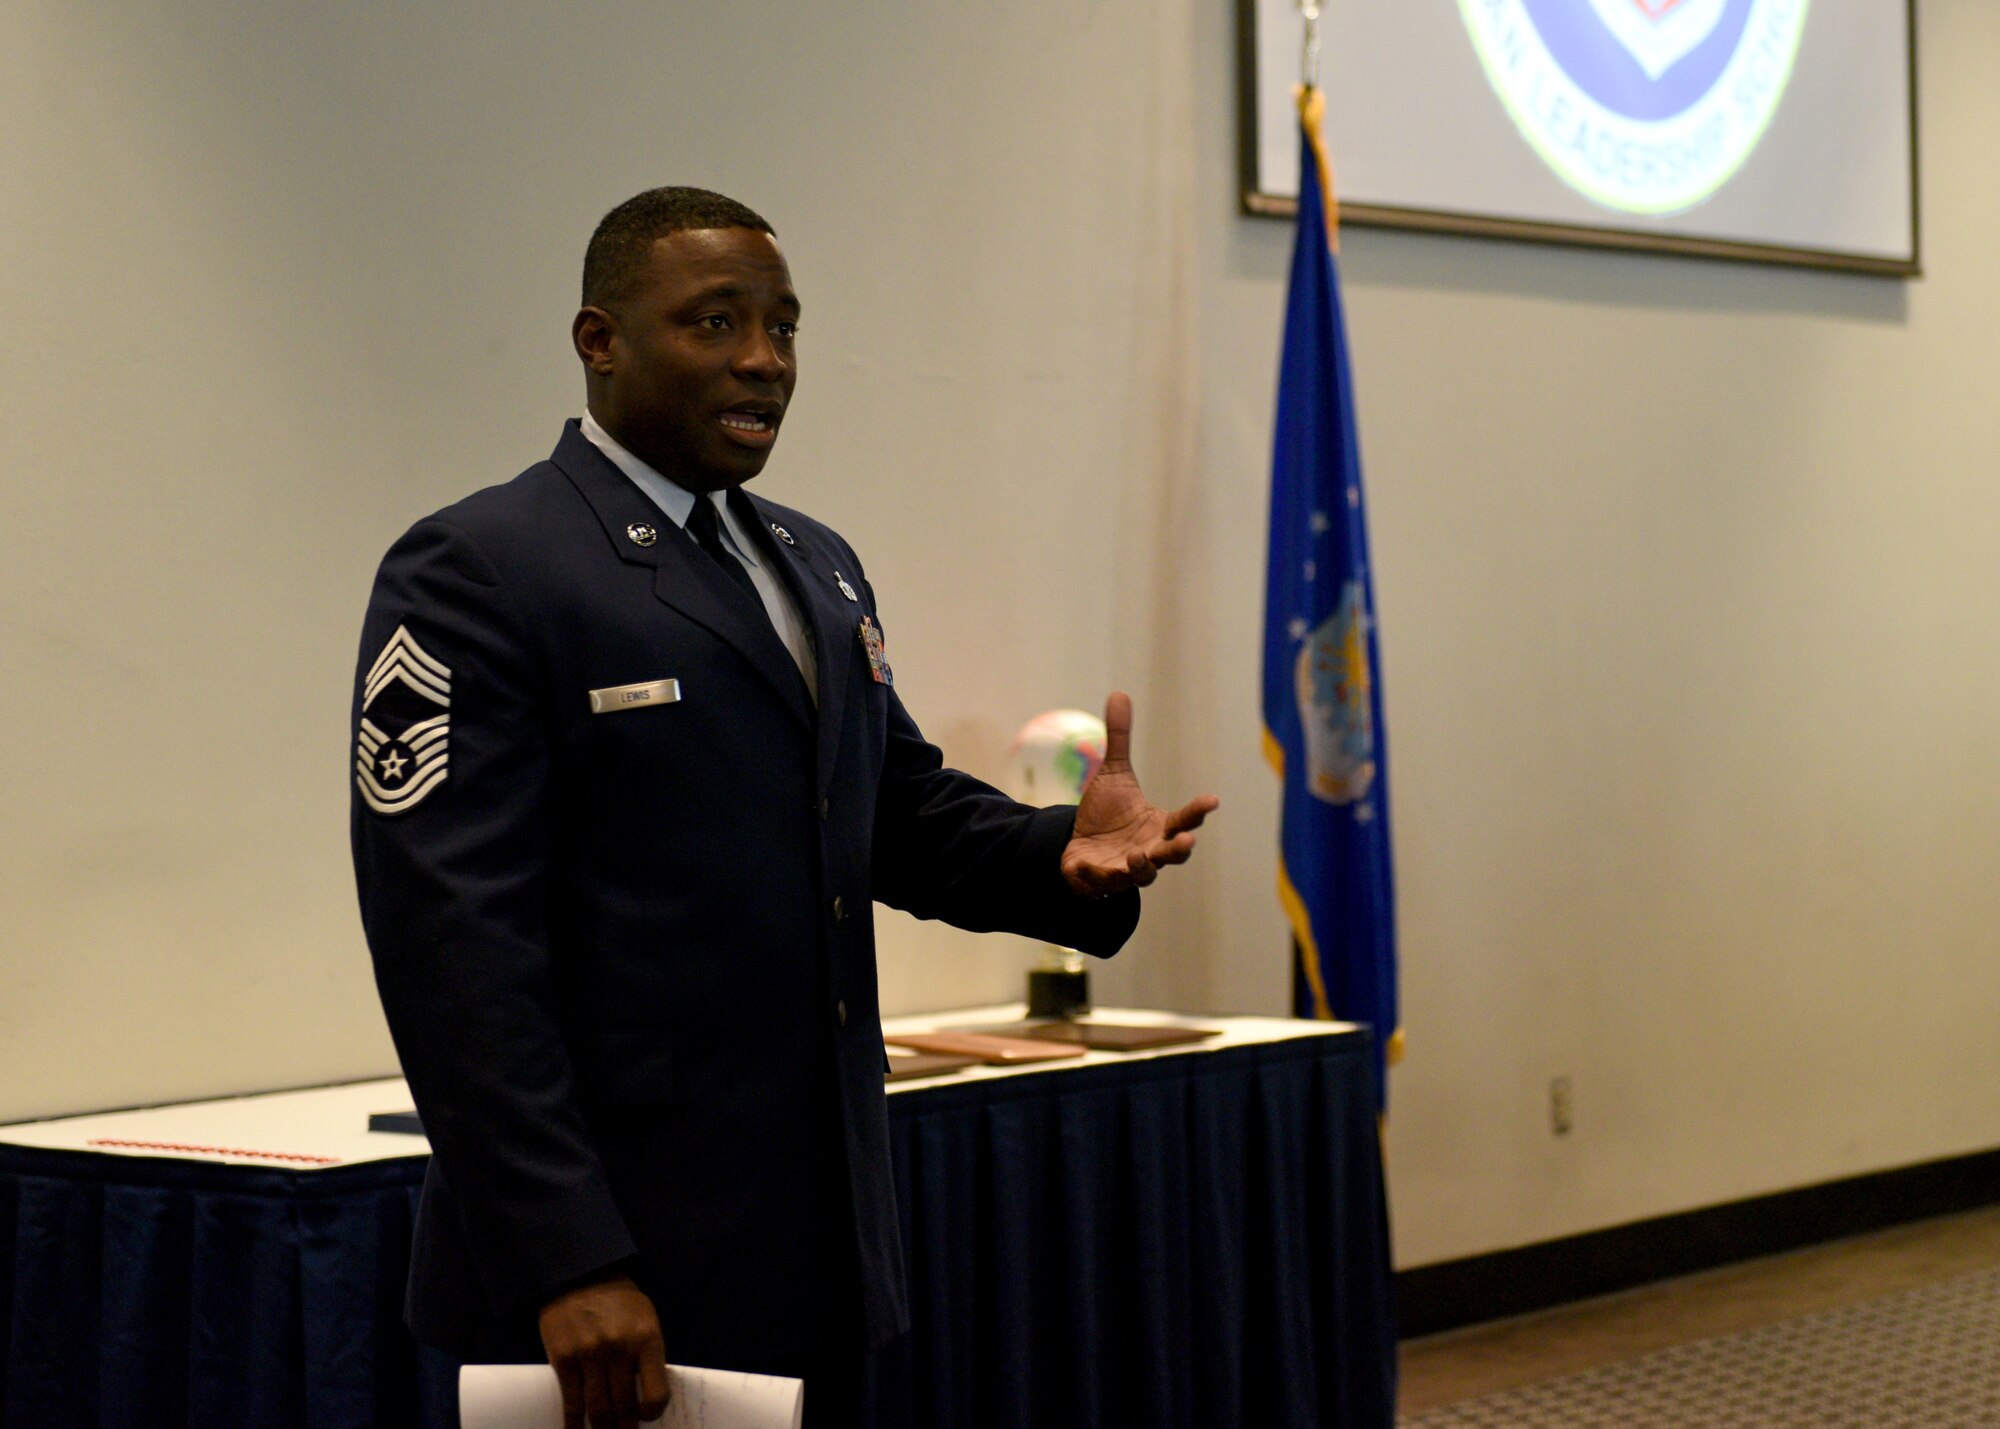 Chief Master Sgt. Brian Lewis, 47th Operations Group superintendent at Laughlin Air Force Base, speaks to the 19-F Airman Leadership School graduates during their ceremony at the event center on Goodfellow Air Force Base, Texas, August 22, 2019. Lewis spoke about how important it is for the graduates to have someone to look up to and to strive to be that person for others. (U.S. Air Force photo by Airman 1st Class Robyn Hunsinger/Released)